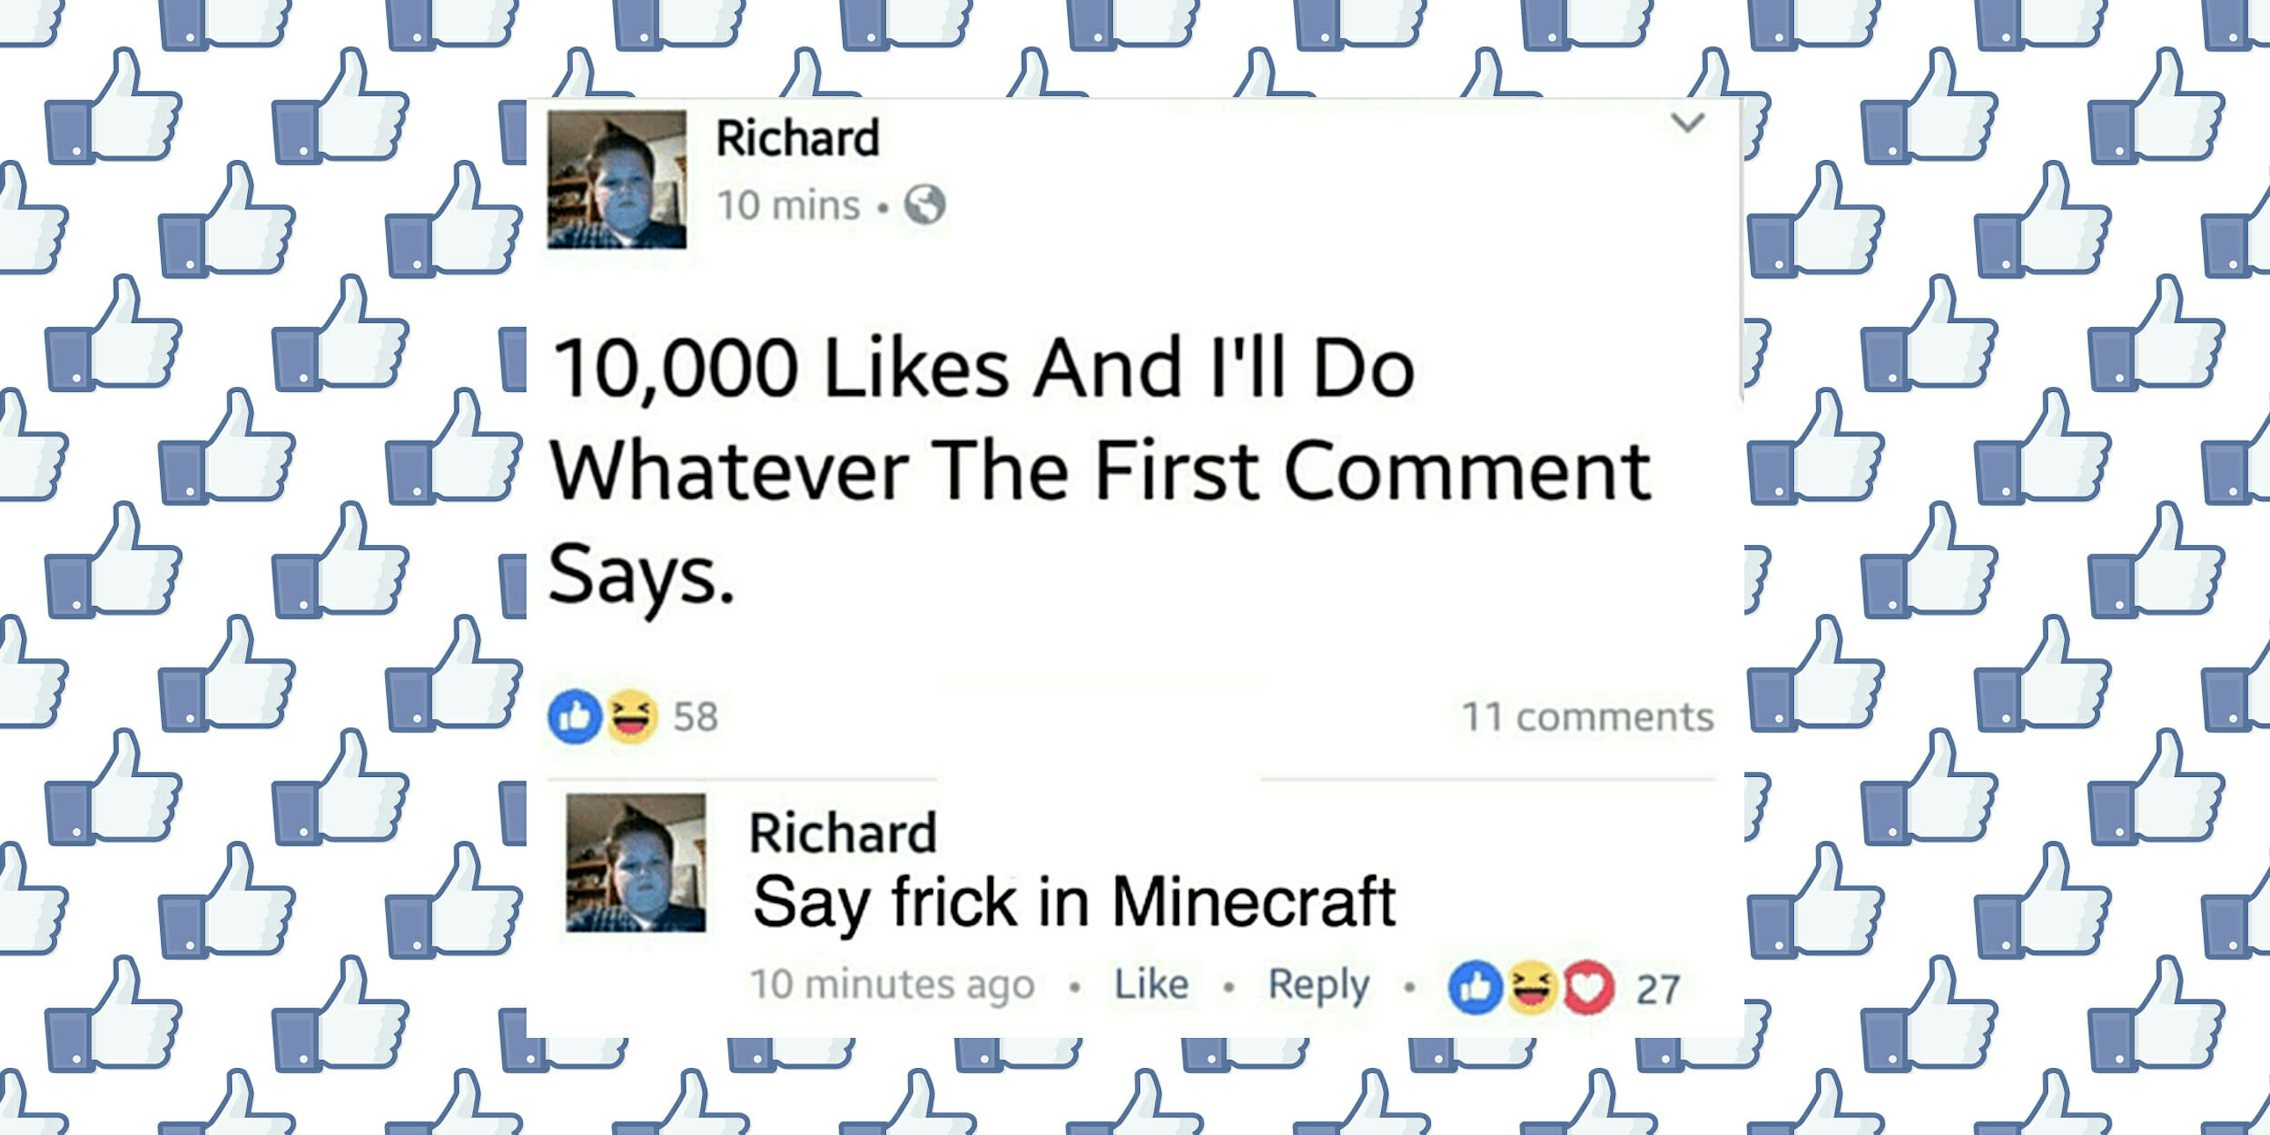 10,000 likes and I'll do whatever the first comment says